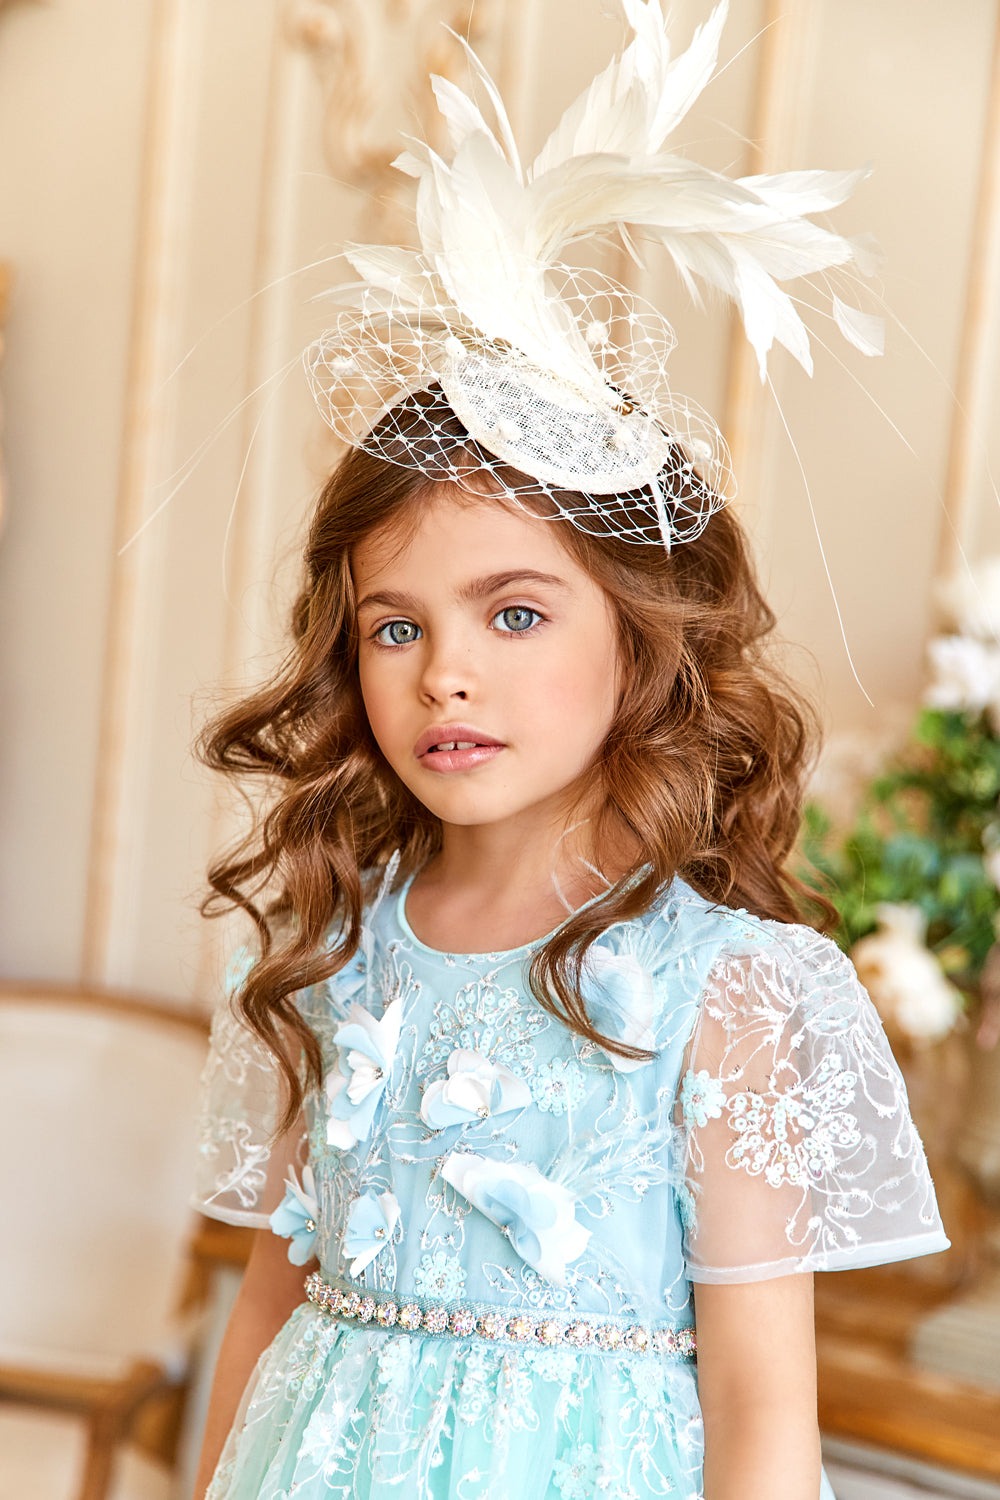 Light blue and white floral lace dress with hand-made flower and feathers decoration and crystal waist embellishment